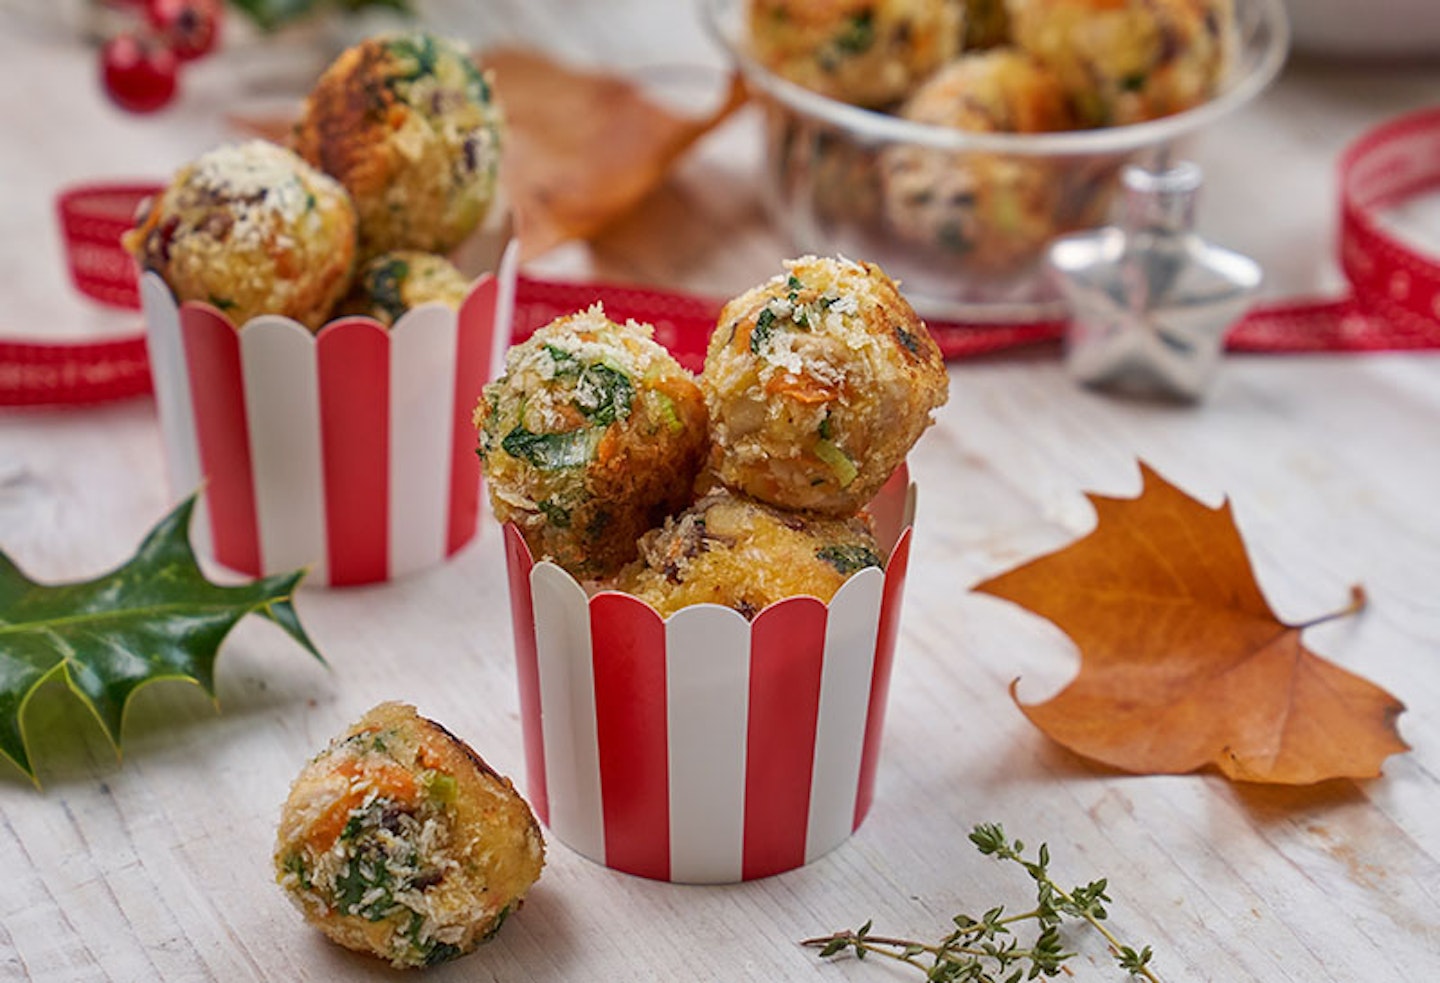 Weaning ideas: Turkey, cranberry and vegetable balls